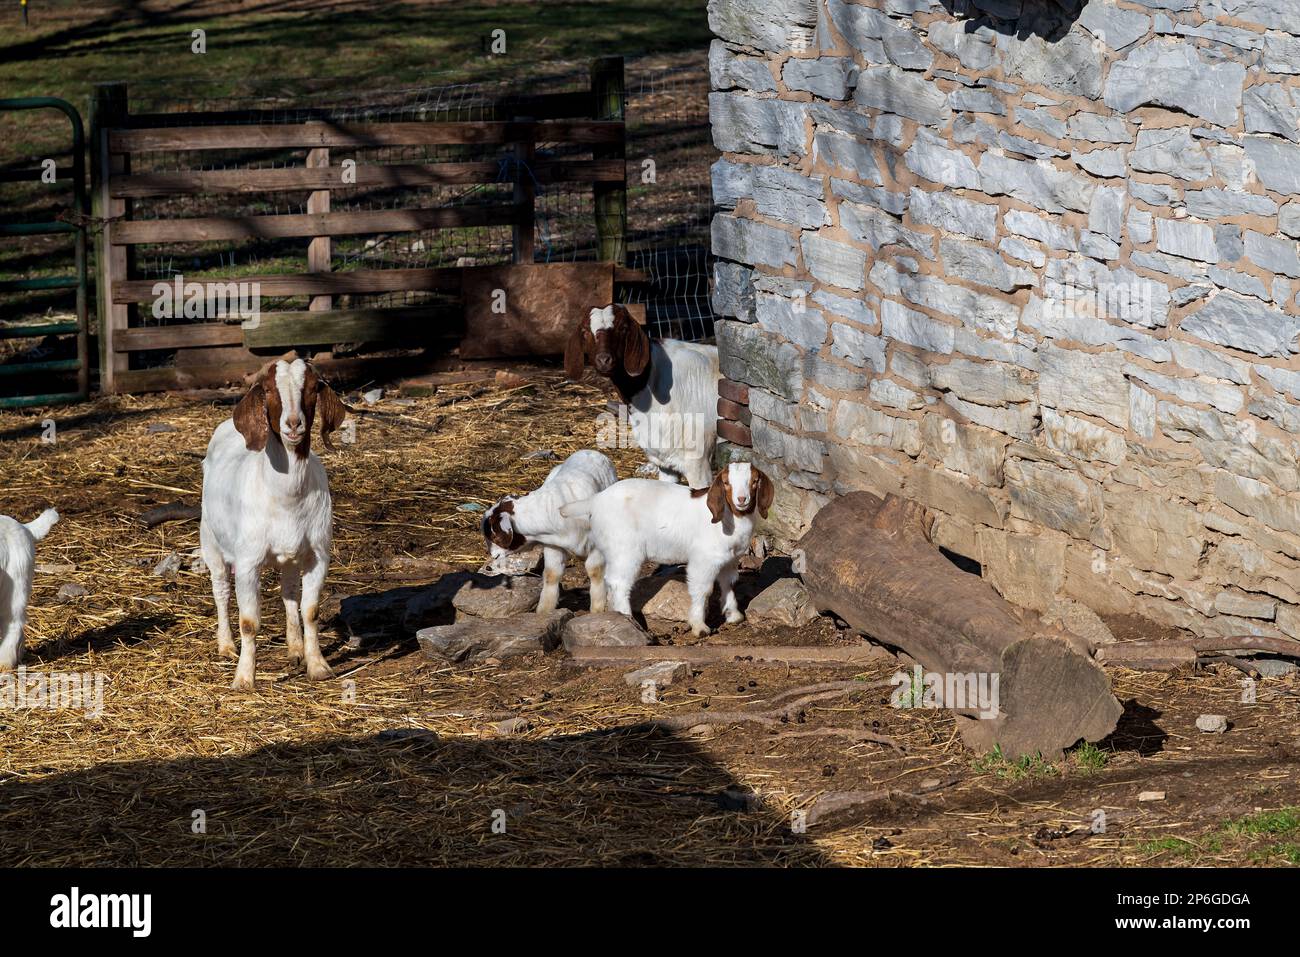 Boer goats with babies in a barnyard. This breed of goat was developed in South Africa in the 1900s for meat production. Stock Photo